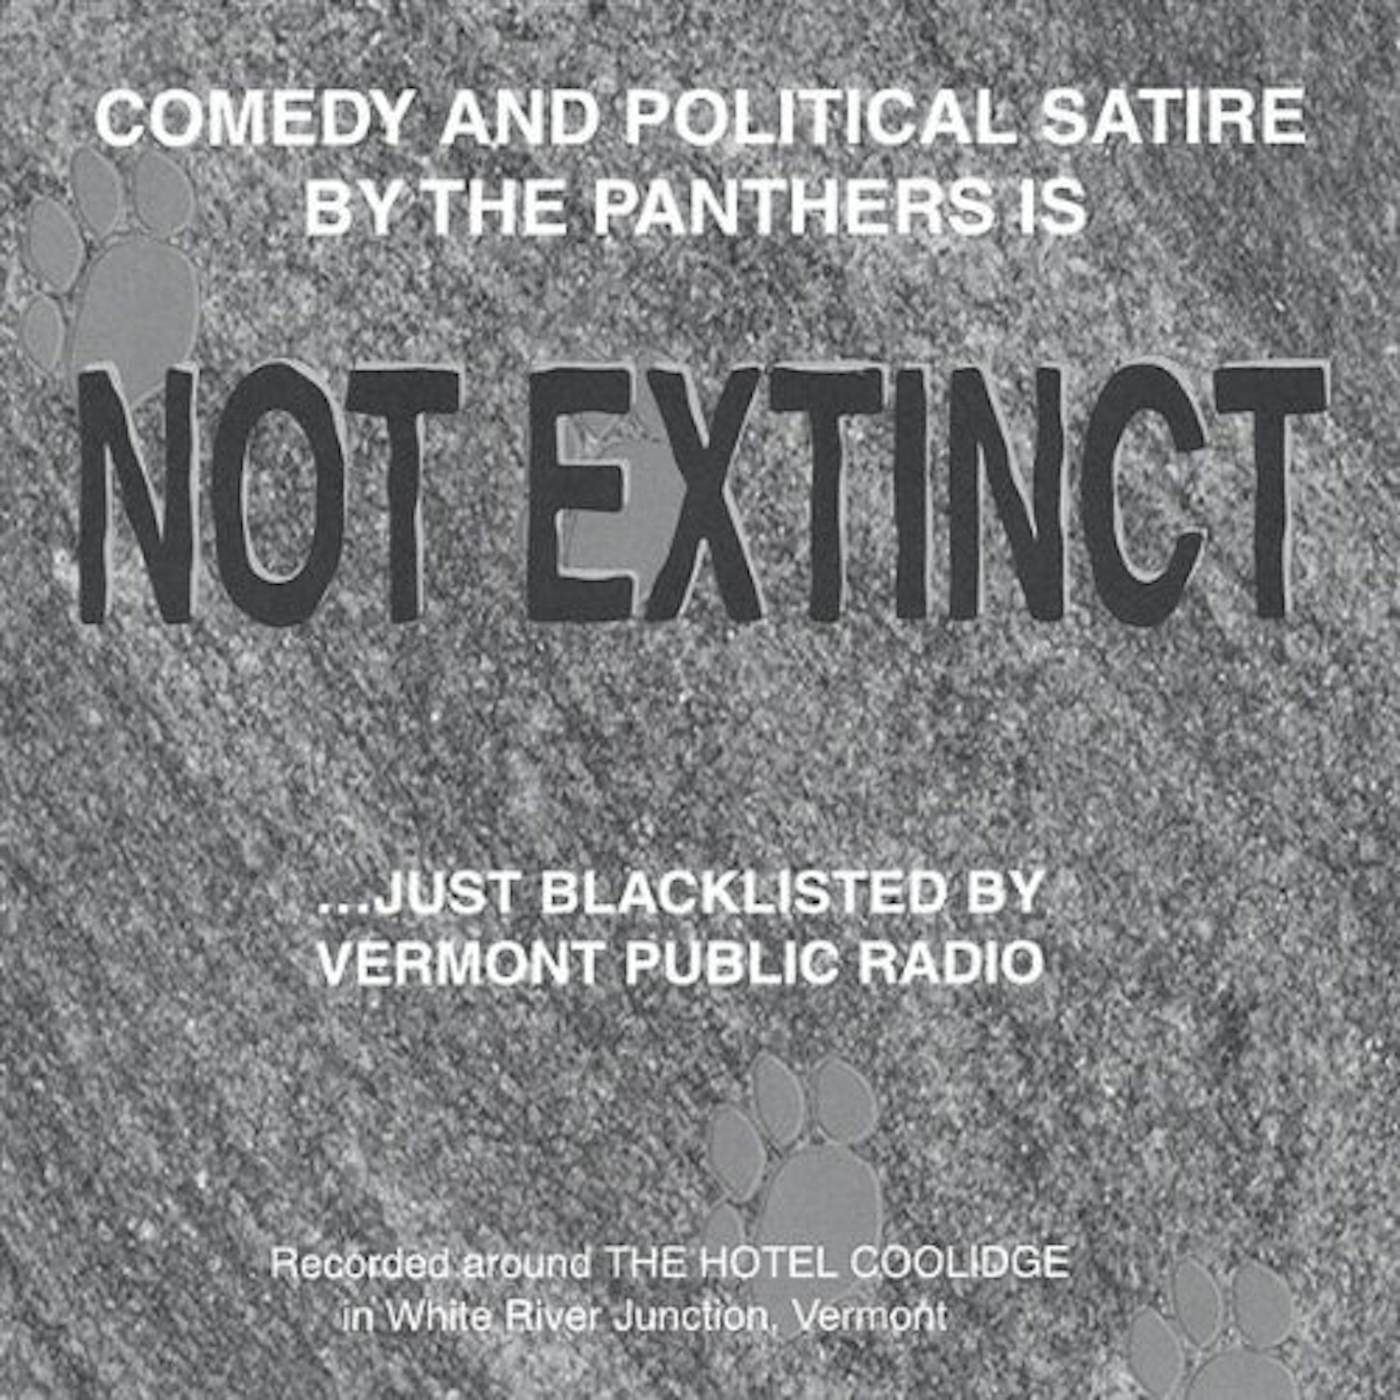 Panthers NOT EXTINCTJUST BLACKLISTED BY VERMONT PUBLIC RADI CD